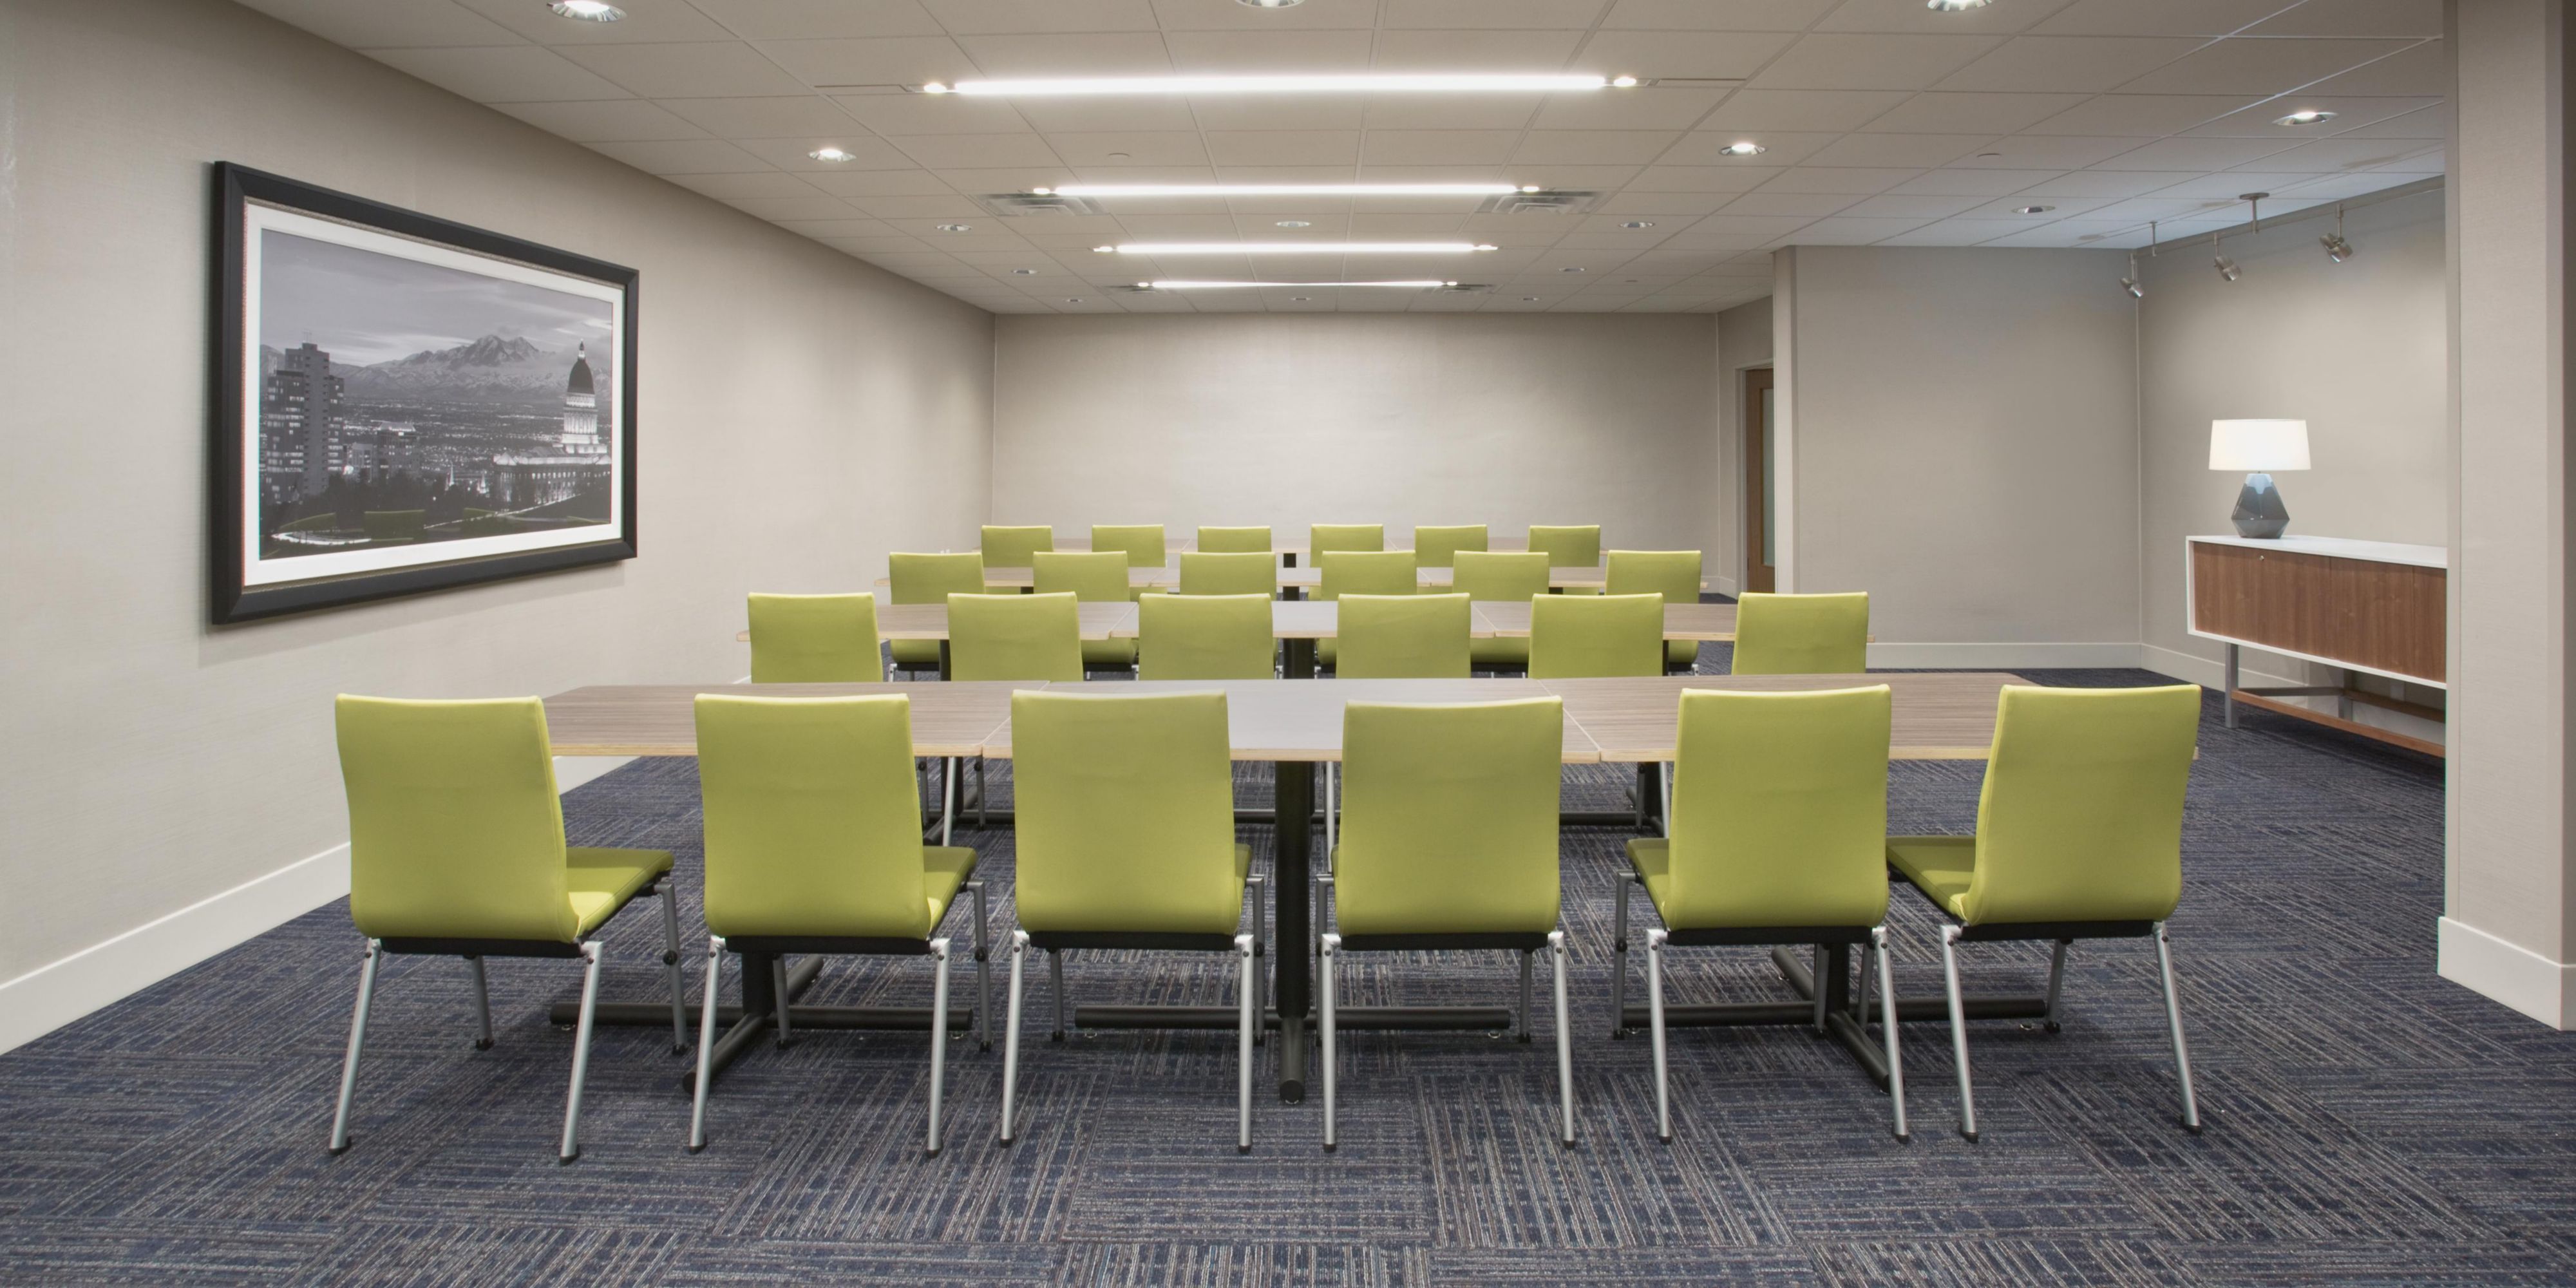 If you are in need of meeting space for a training event, seminar, reunion, or reception that can accommodate between 1-100 people we have the perfect space for you. Your meeting space comes equipped with everything needed to make your event a success including custom setup and dedicated staff. Group sleeping room discount starts at 10+ rooms.